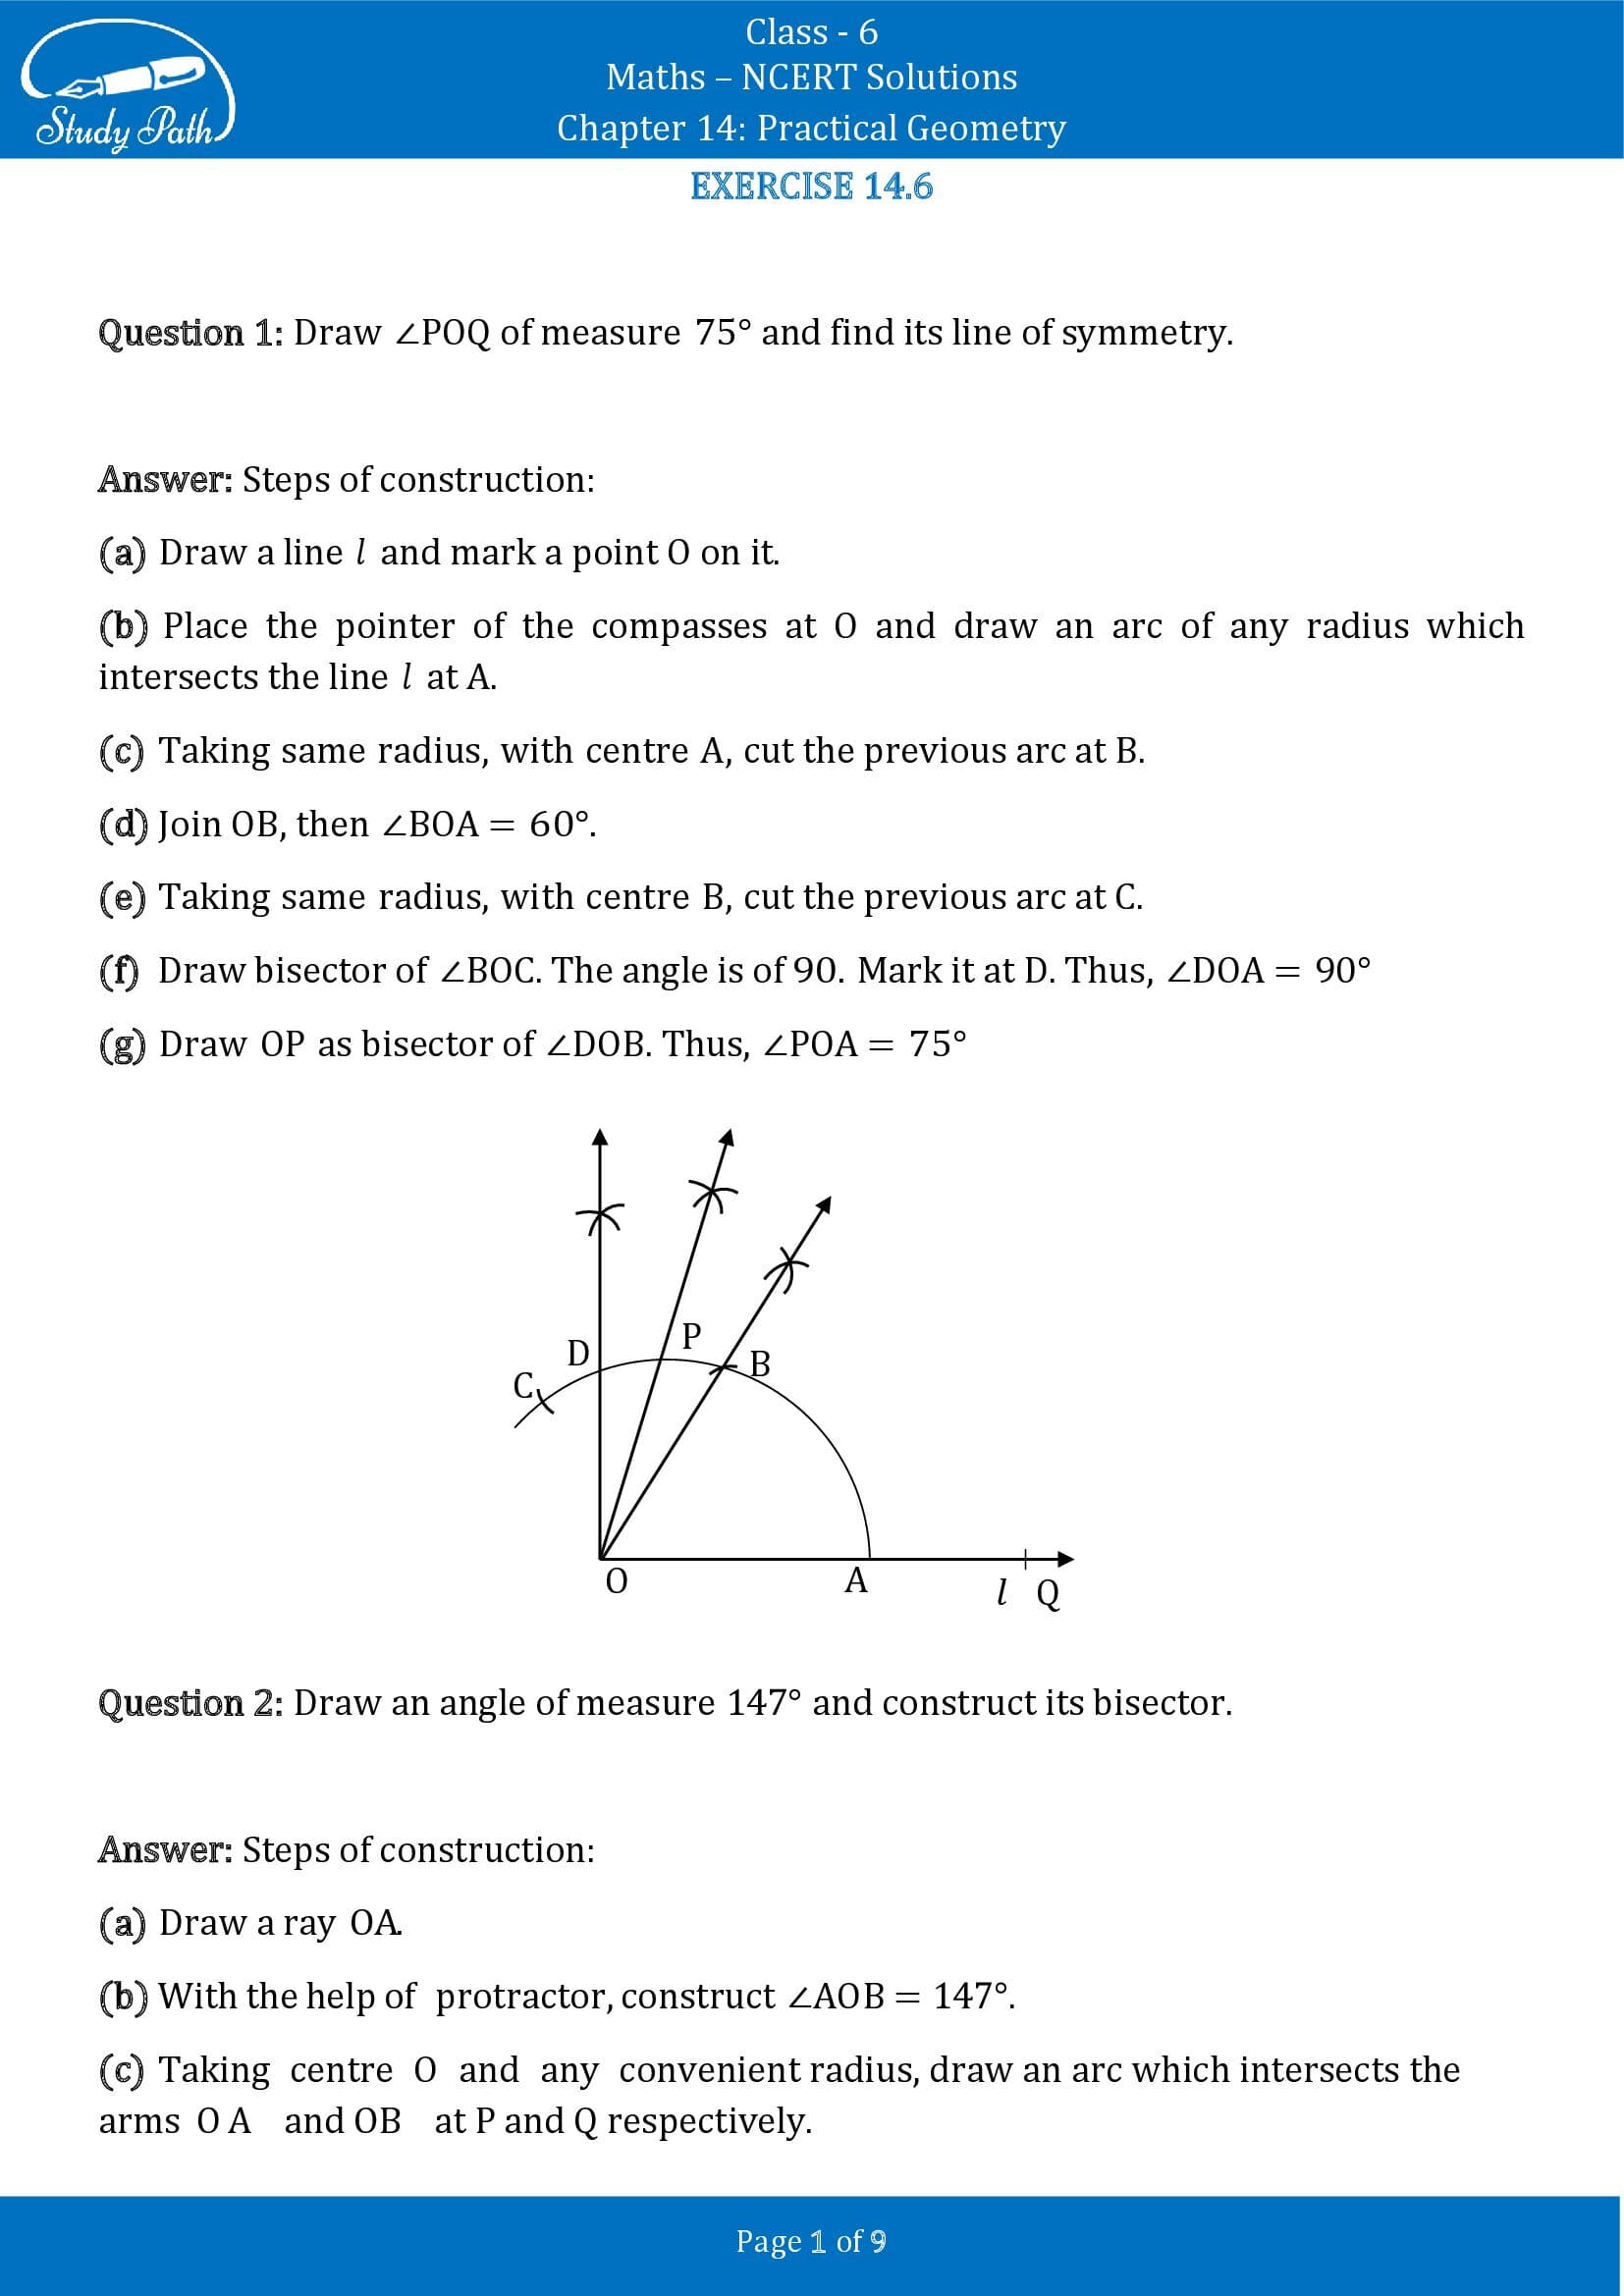 NCERT Solutions for Class 6 Maths Chapter 14 Practical Geometry Exercise 14.6 00001